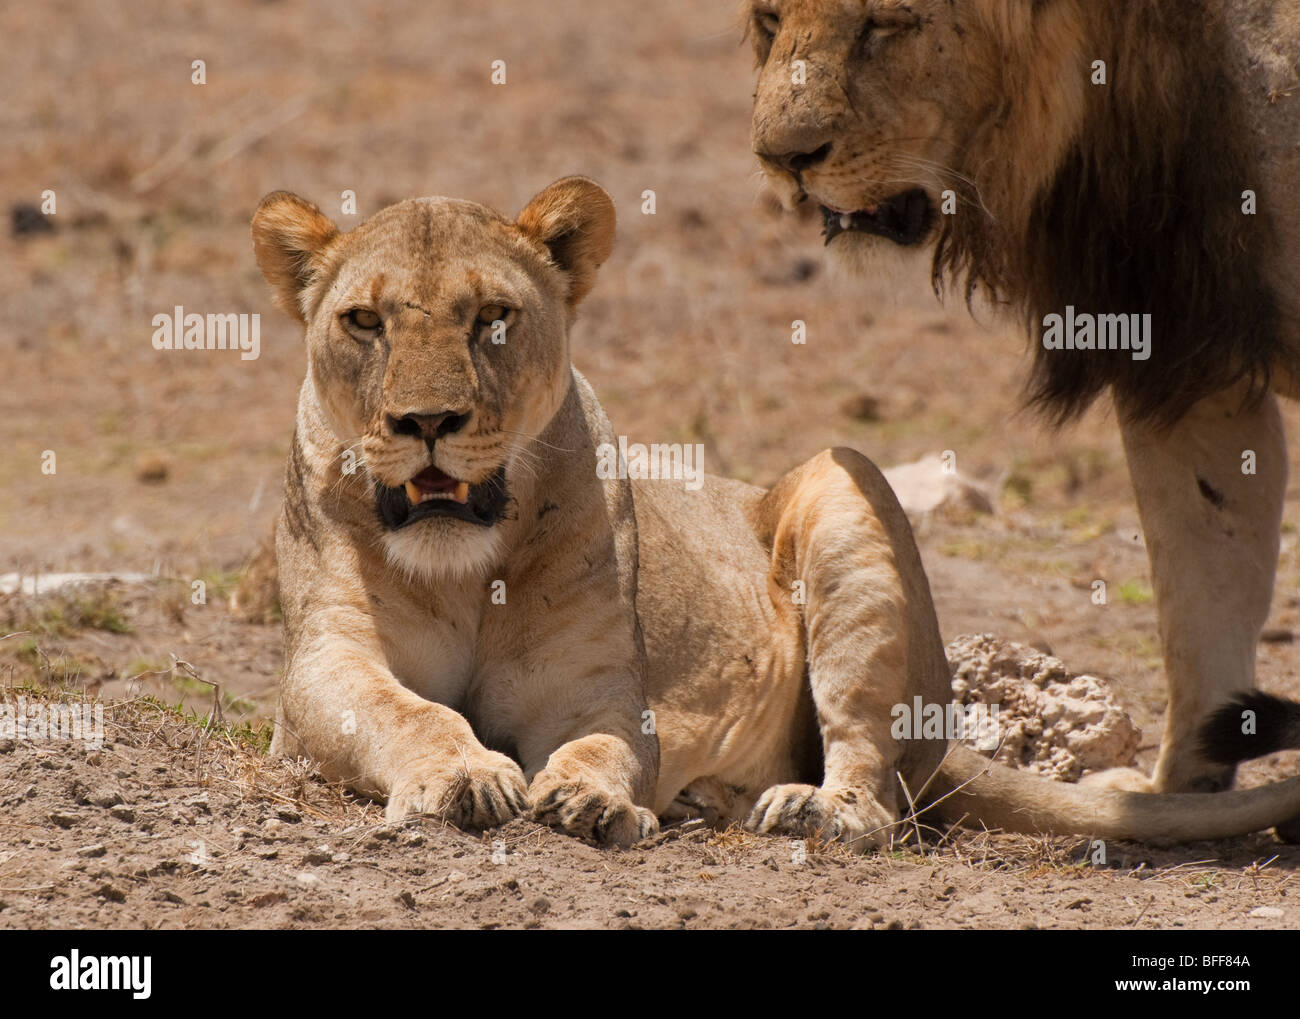 A resting Lioness with her mate stood beside her Stock Photo